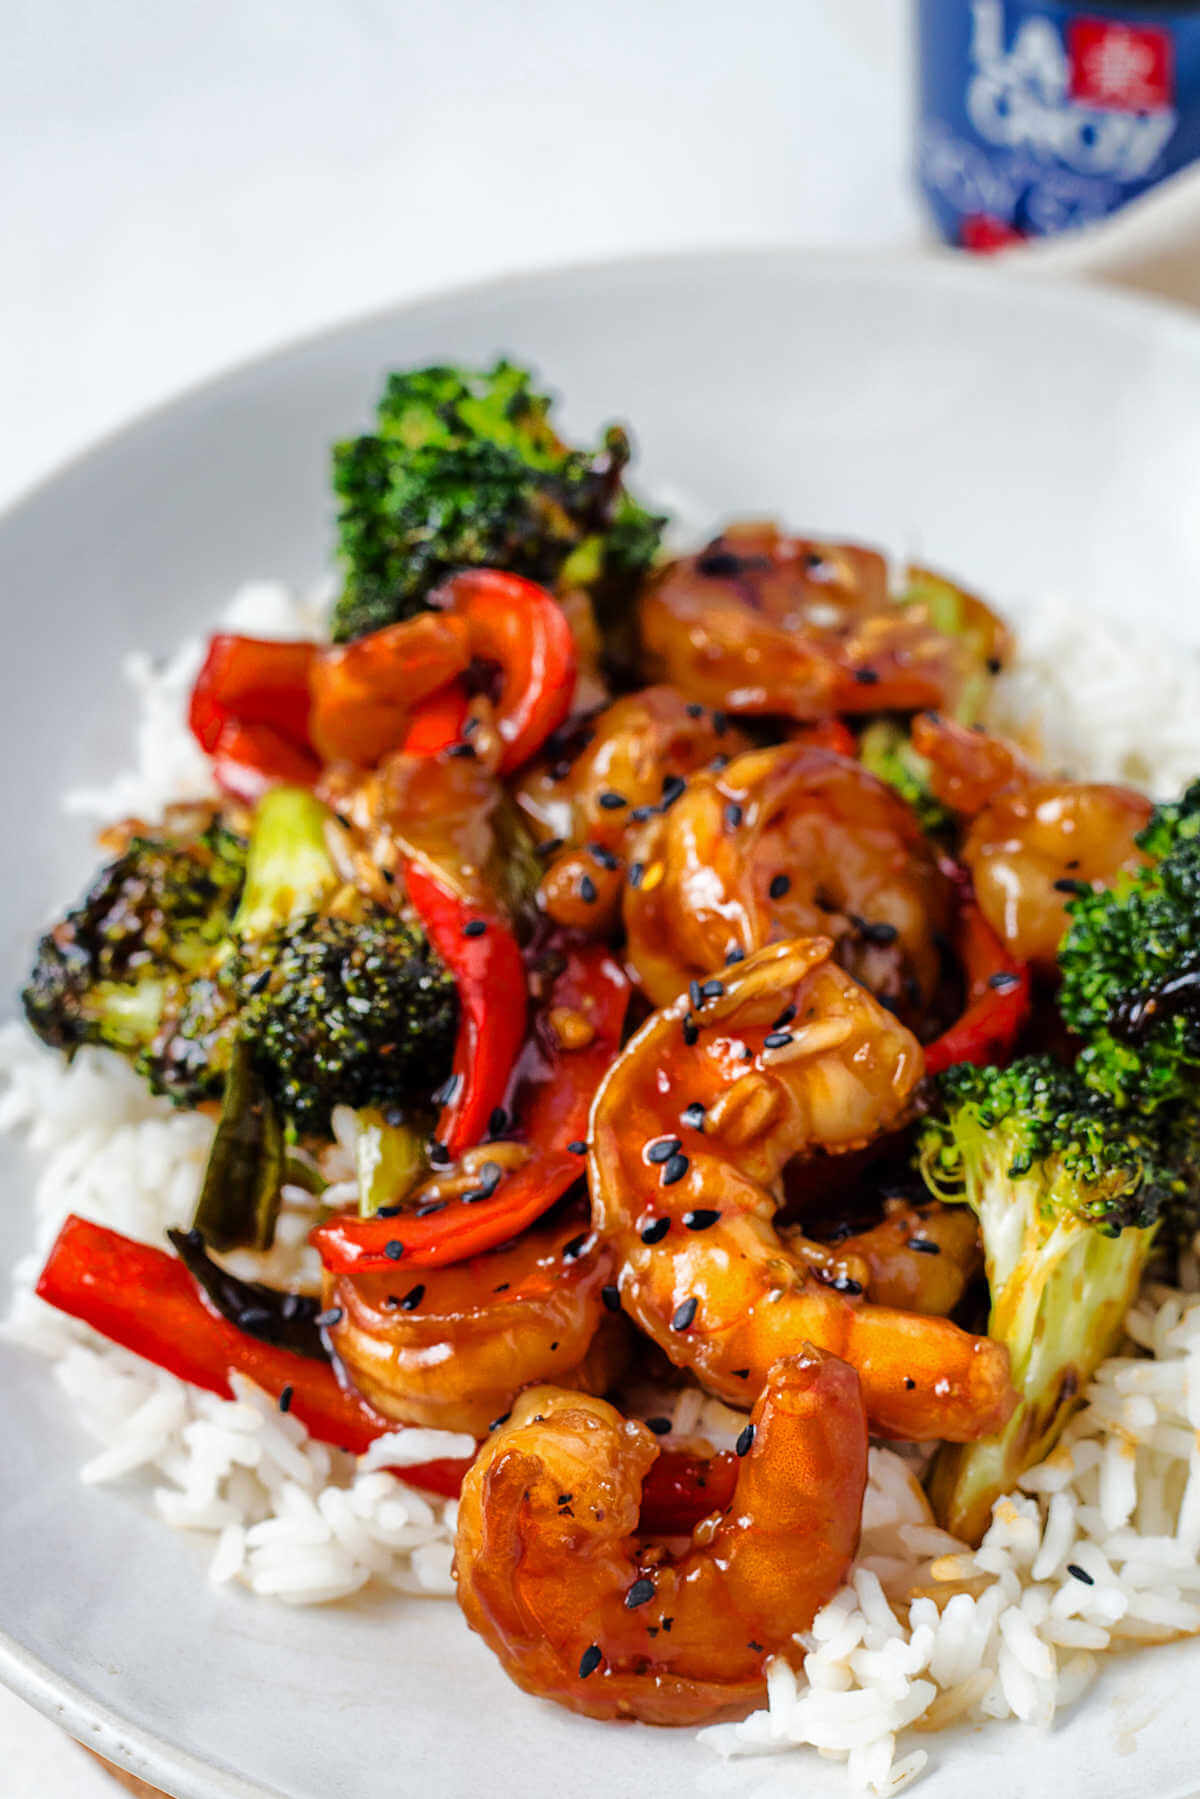 shrimp, broccoli florets, and sliced red bell pepper in a stir fry sauce on a bed of rice.